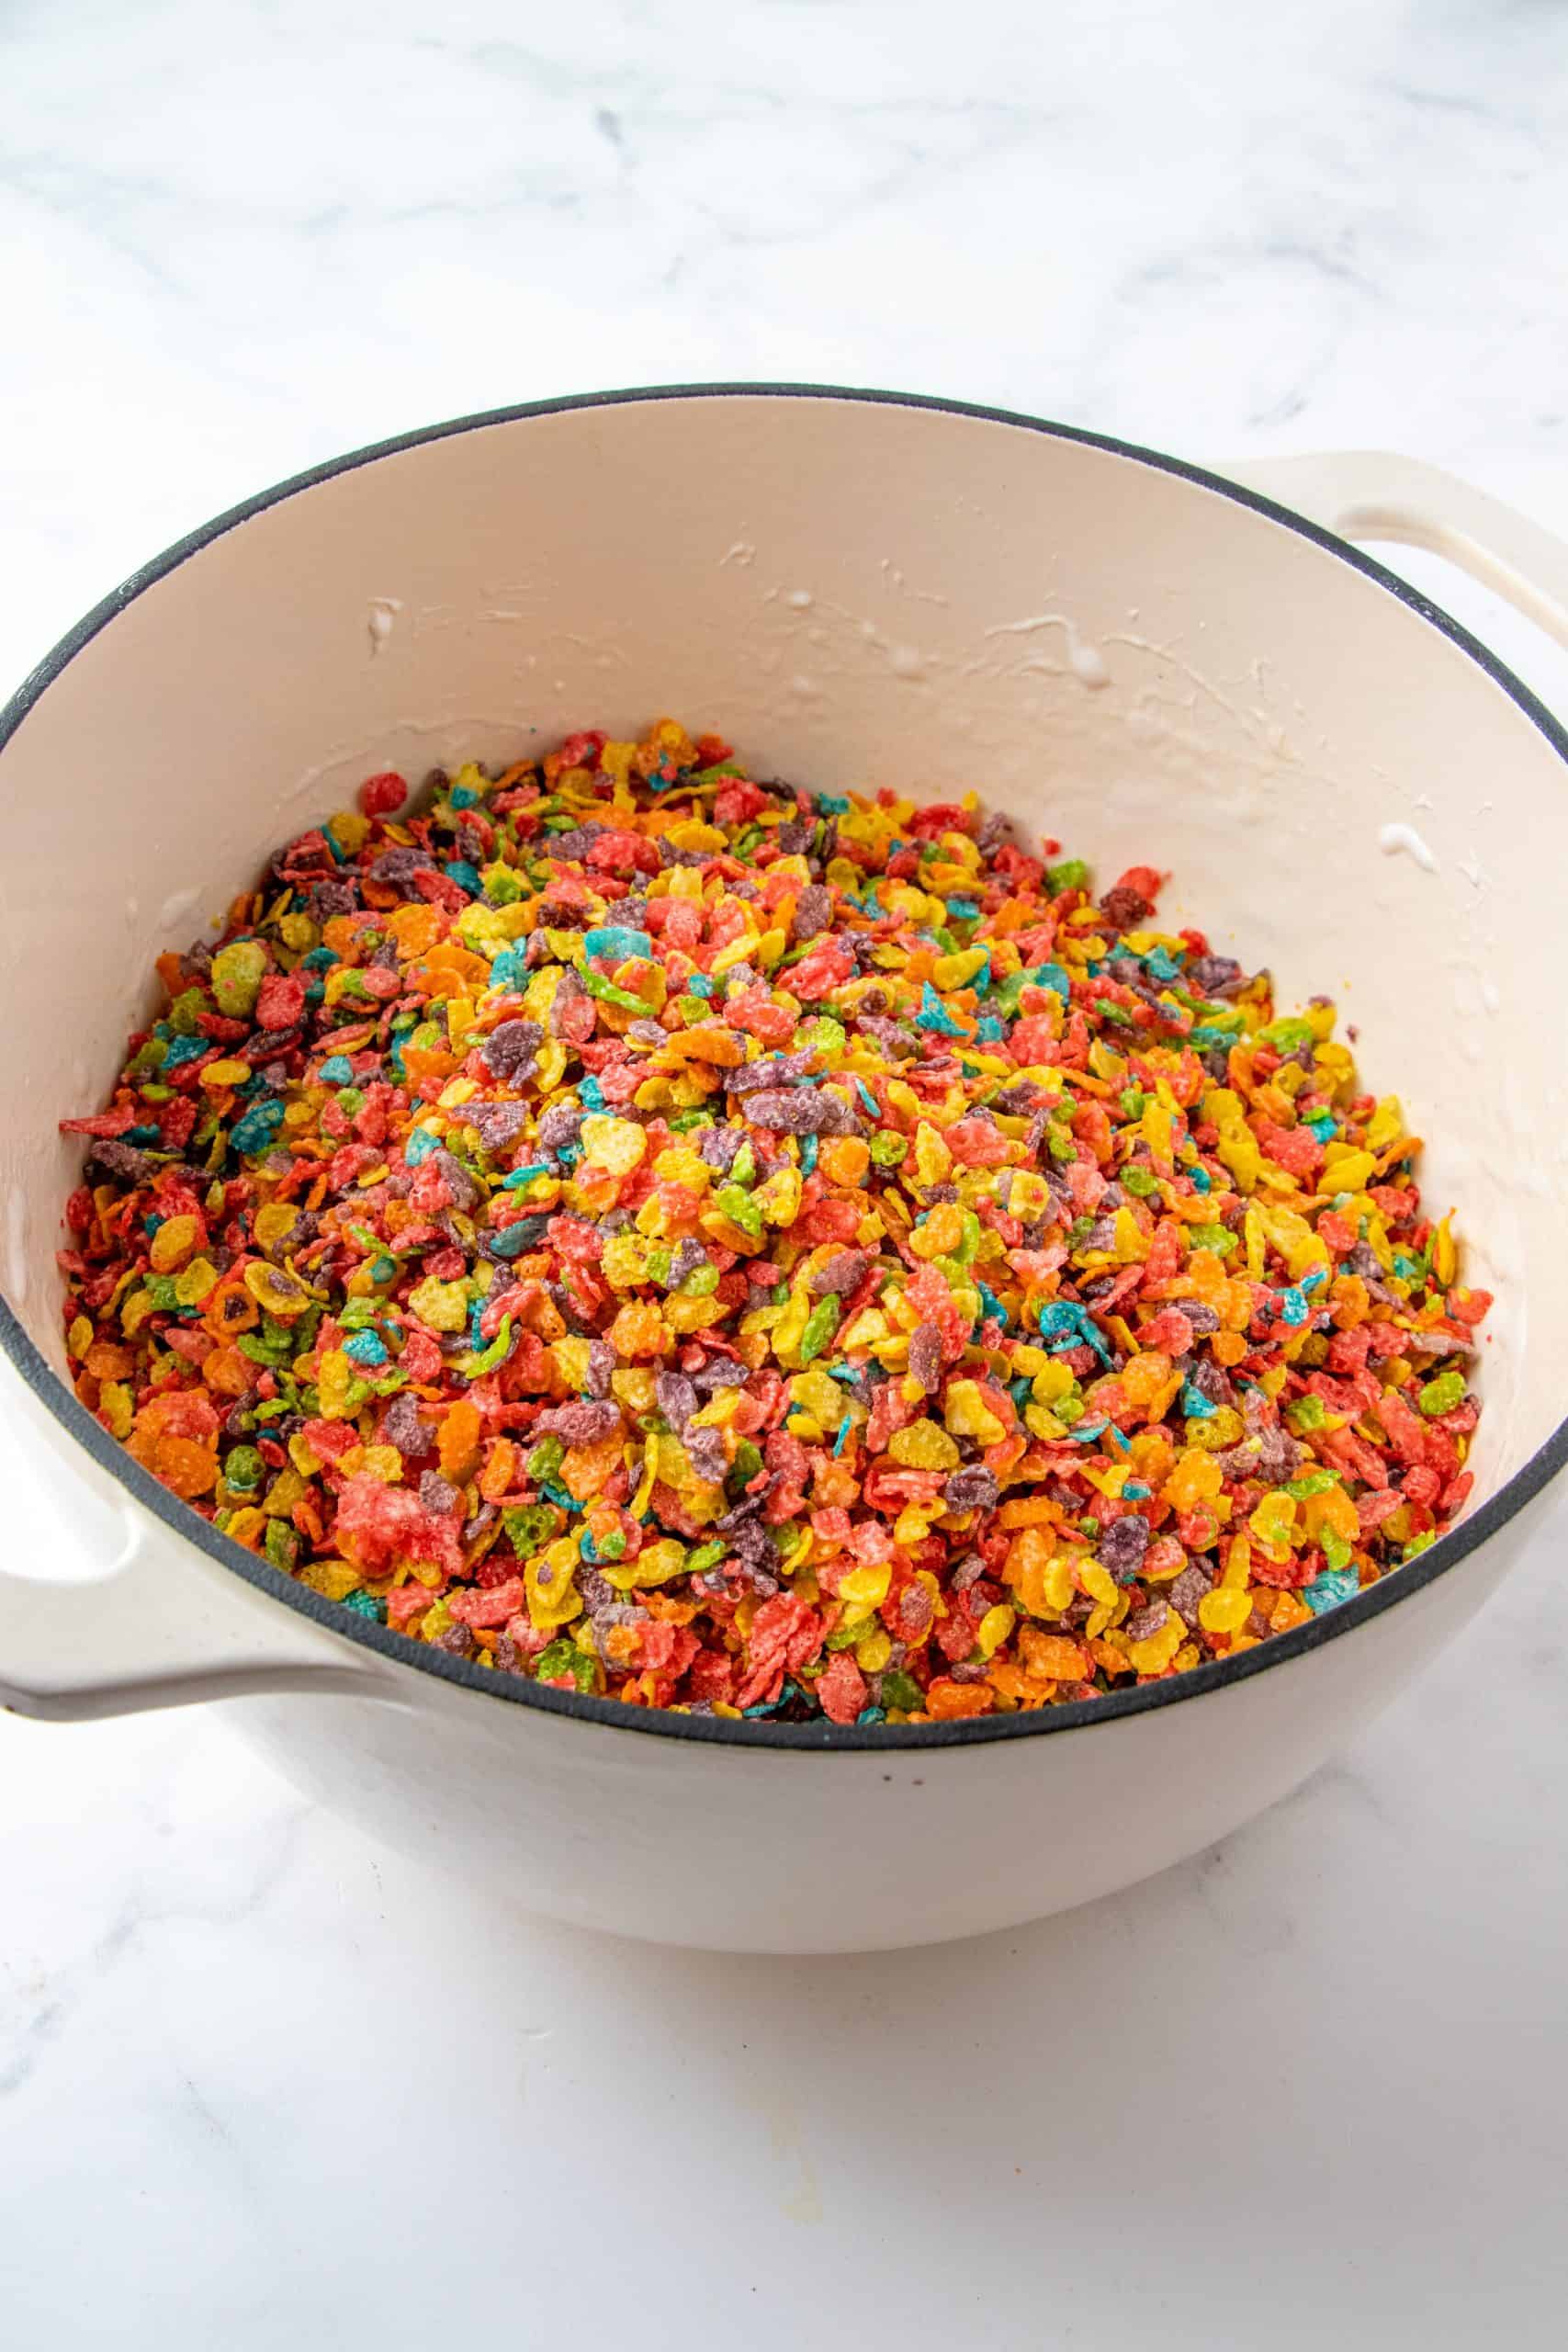 Fruity Pebbles added to marshmallows.